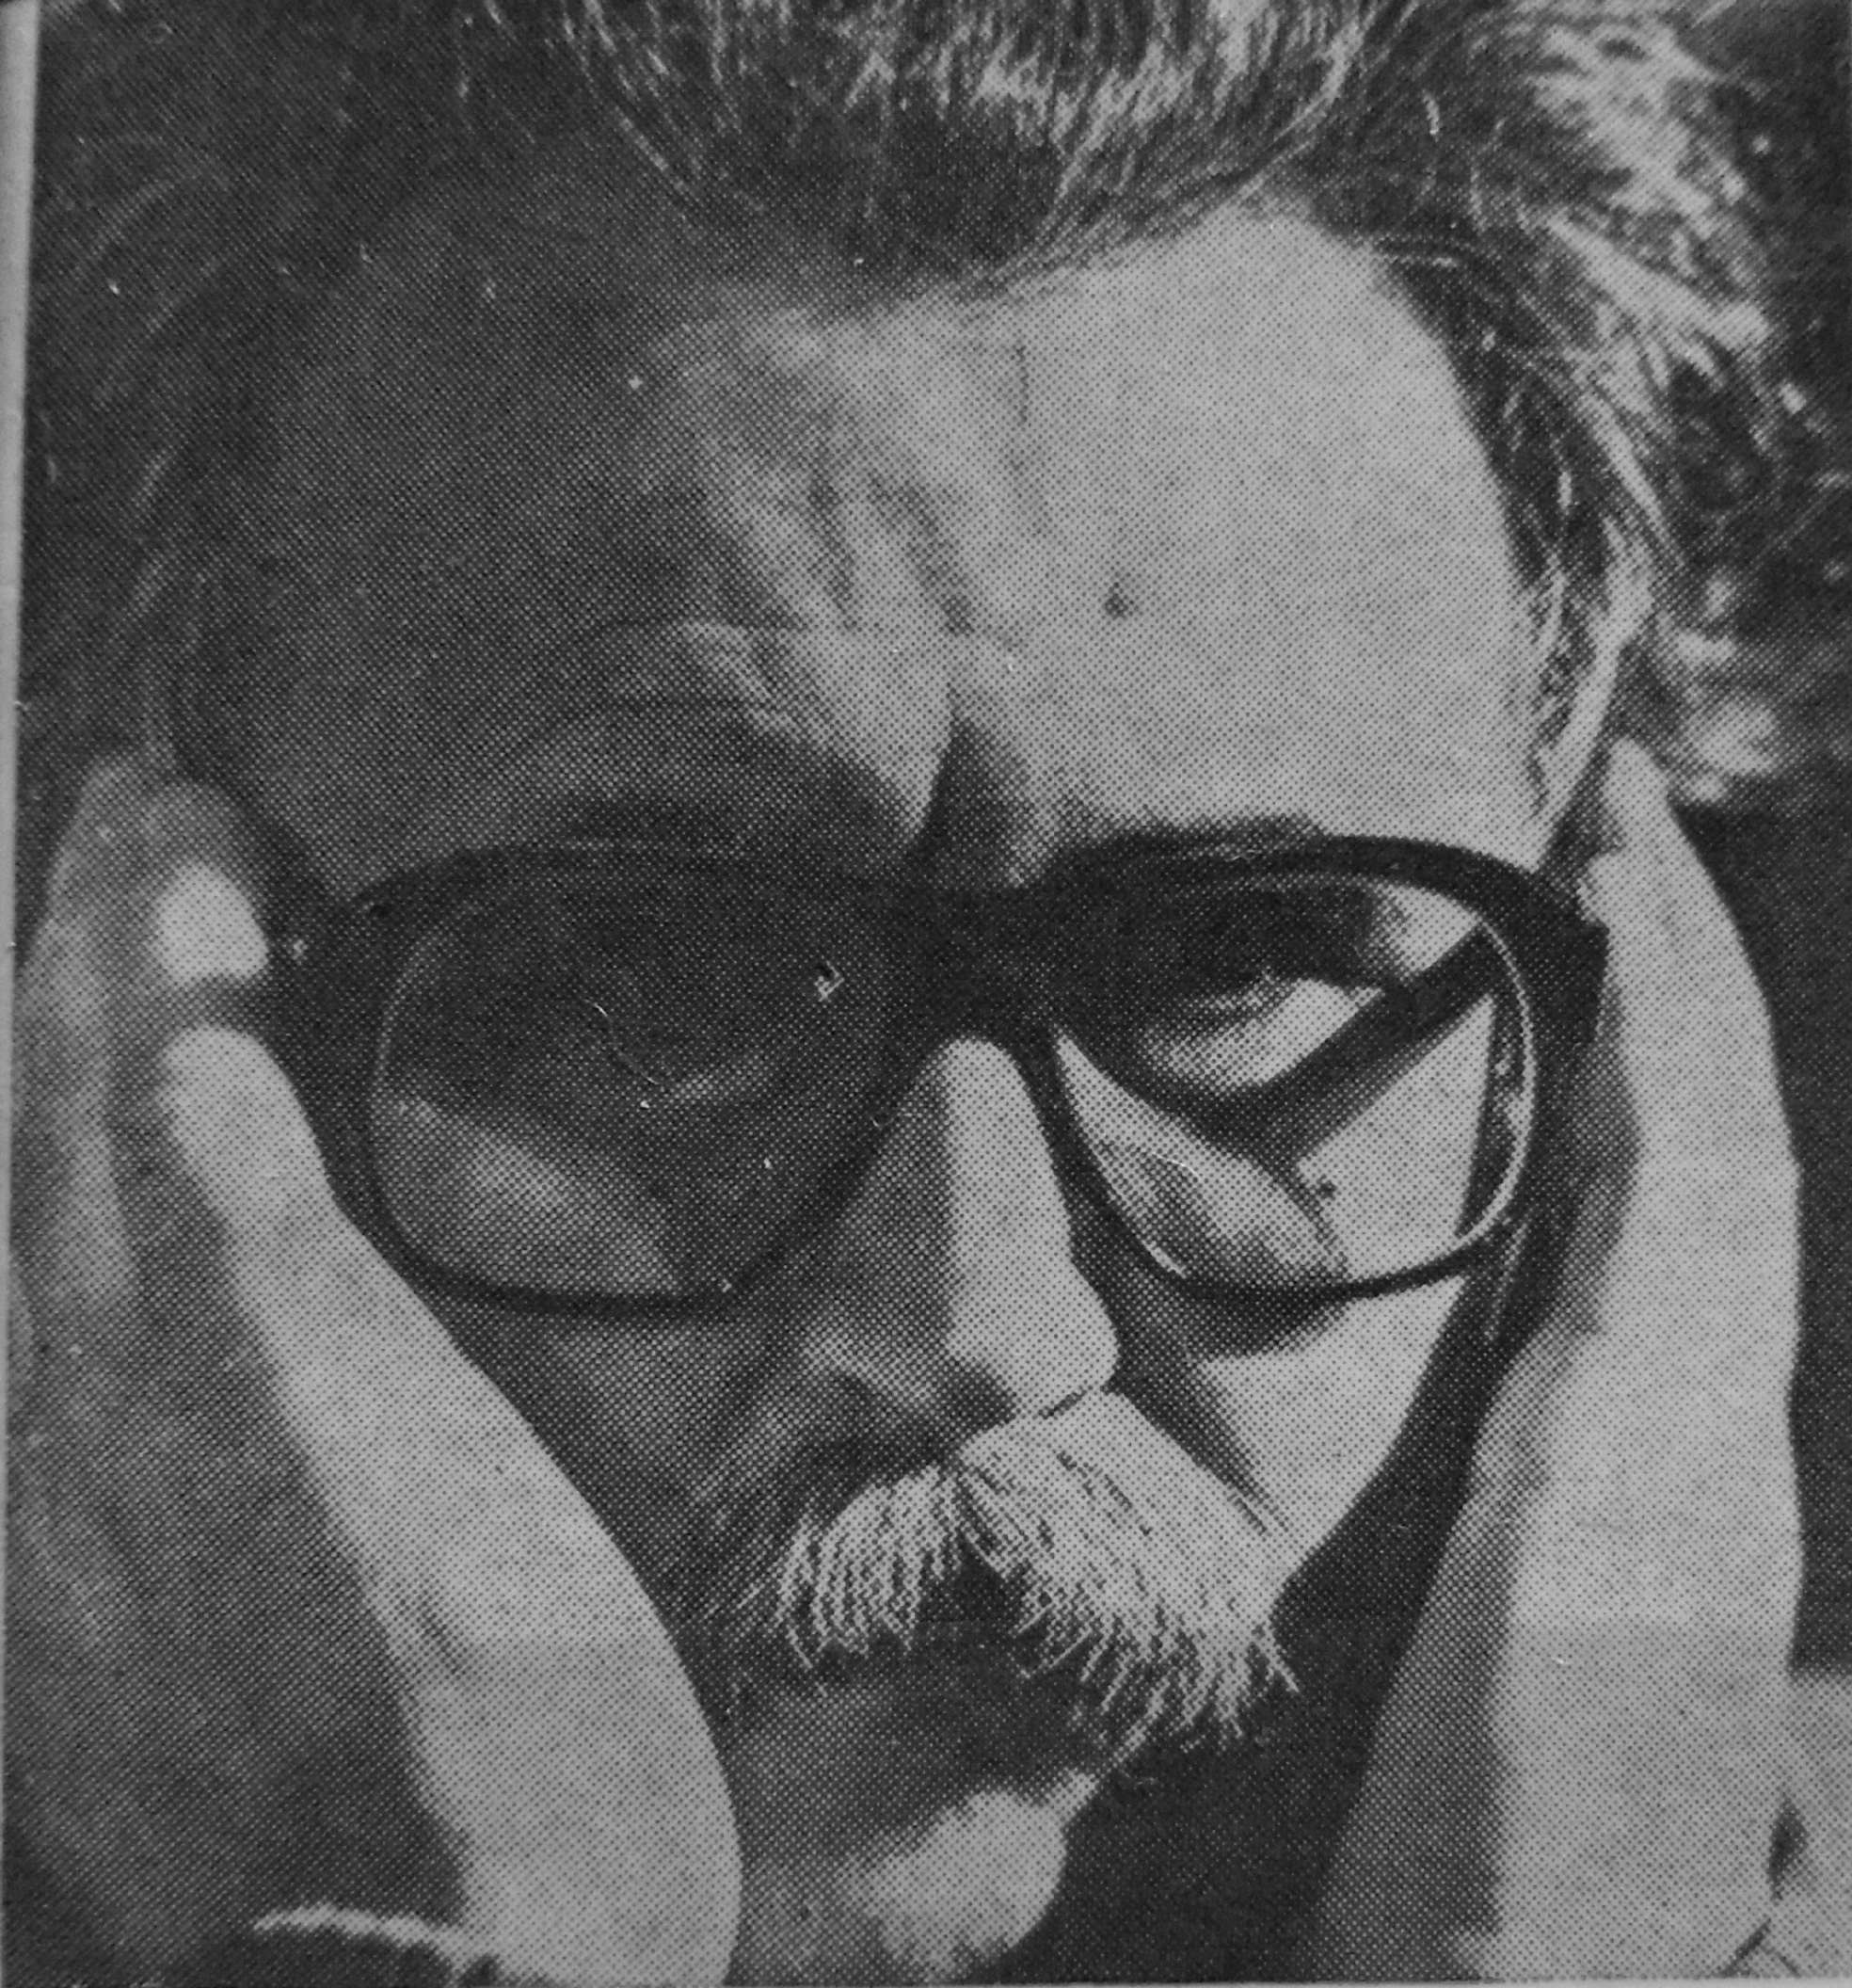 A portrait of Ivan Aralica on the back cover of his novel.